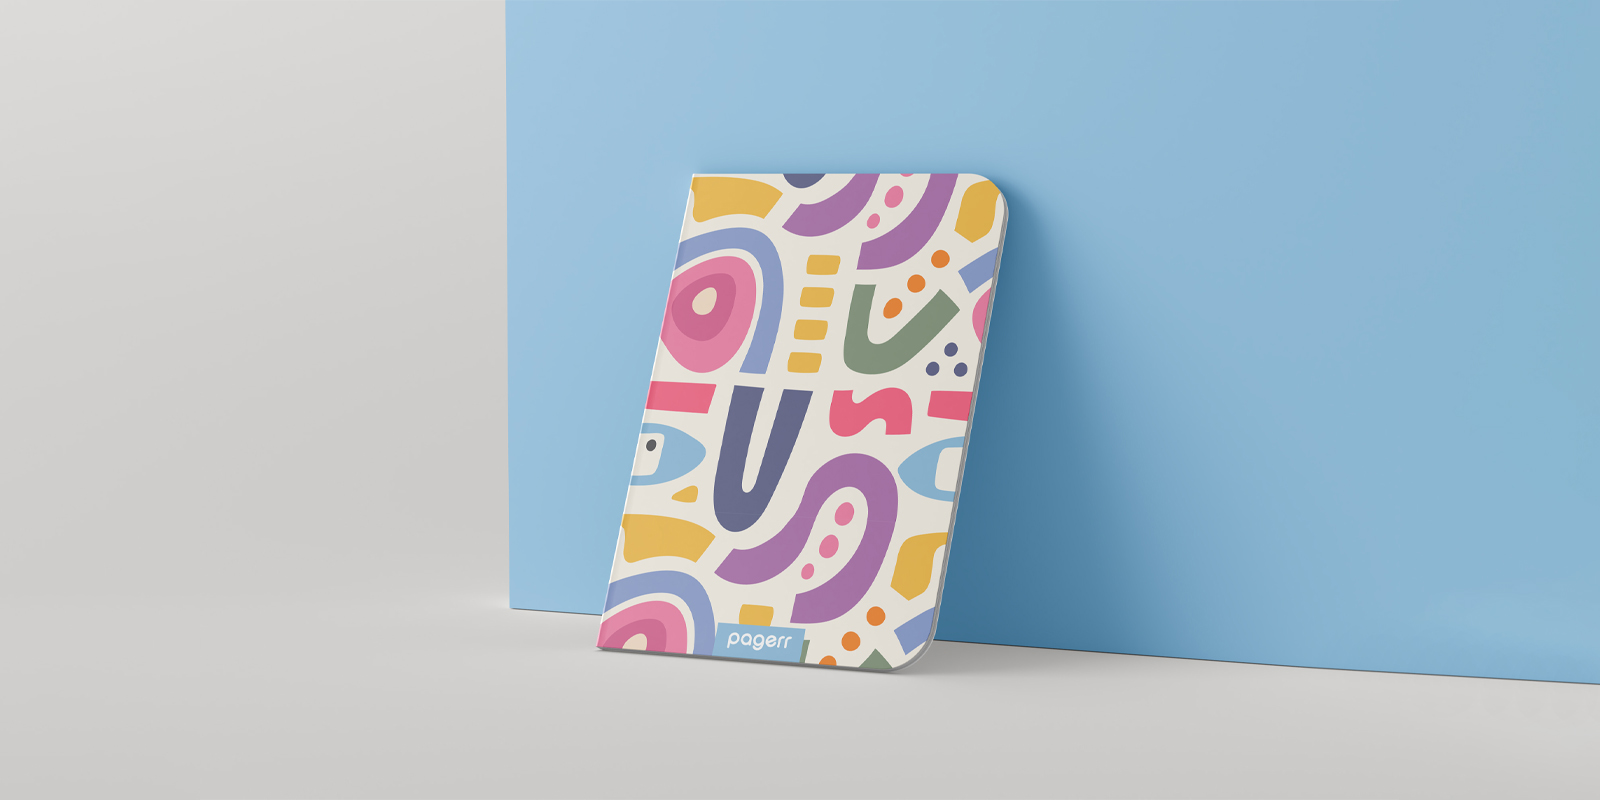 Stapled notebooks in Toowoomba - Print with Pagerr